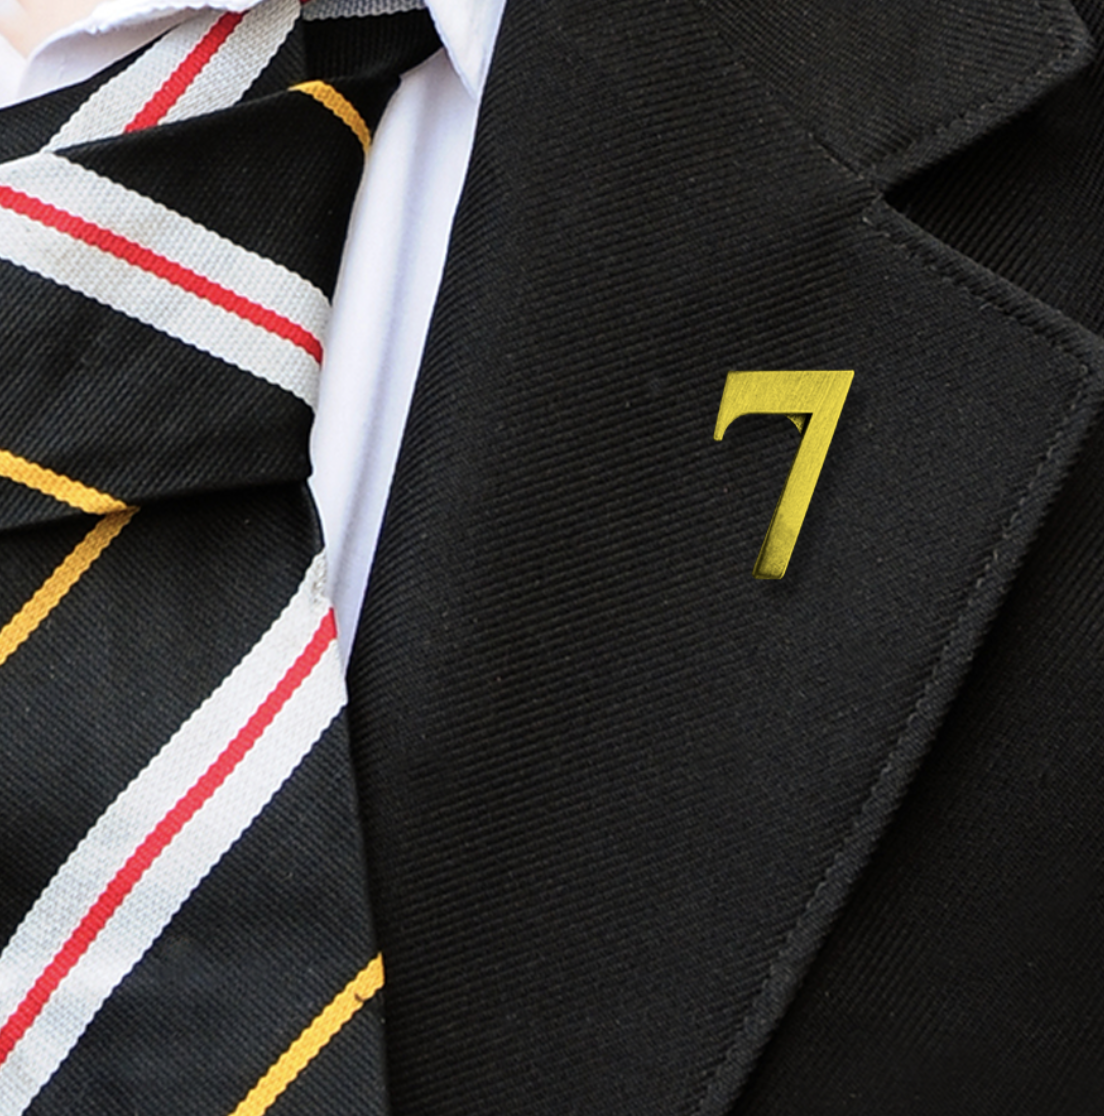 YEAR 7 BADGE IN GOLD